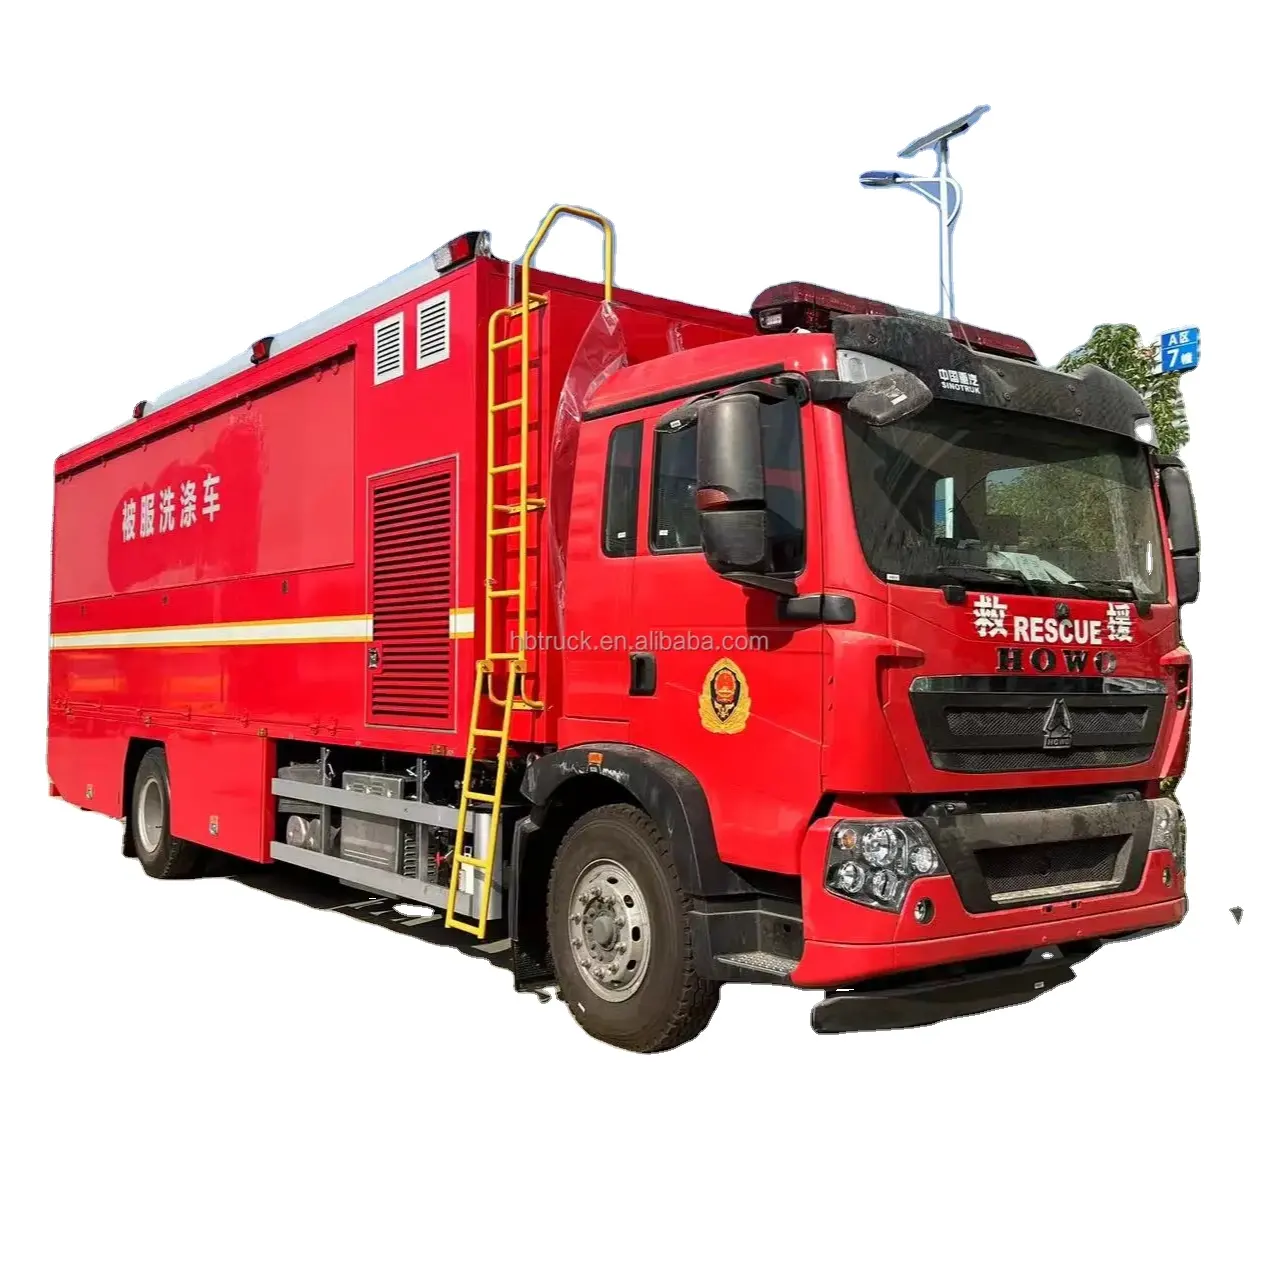 mobile laundry system and industrial clothes dryer Emergency vehicles